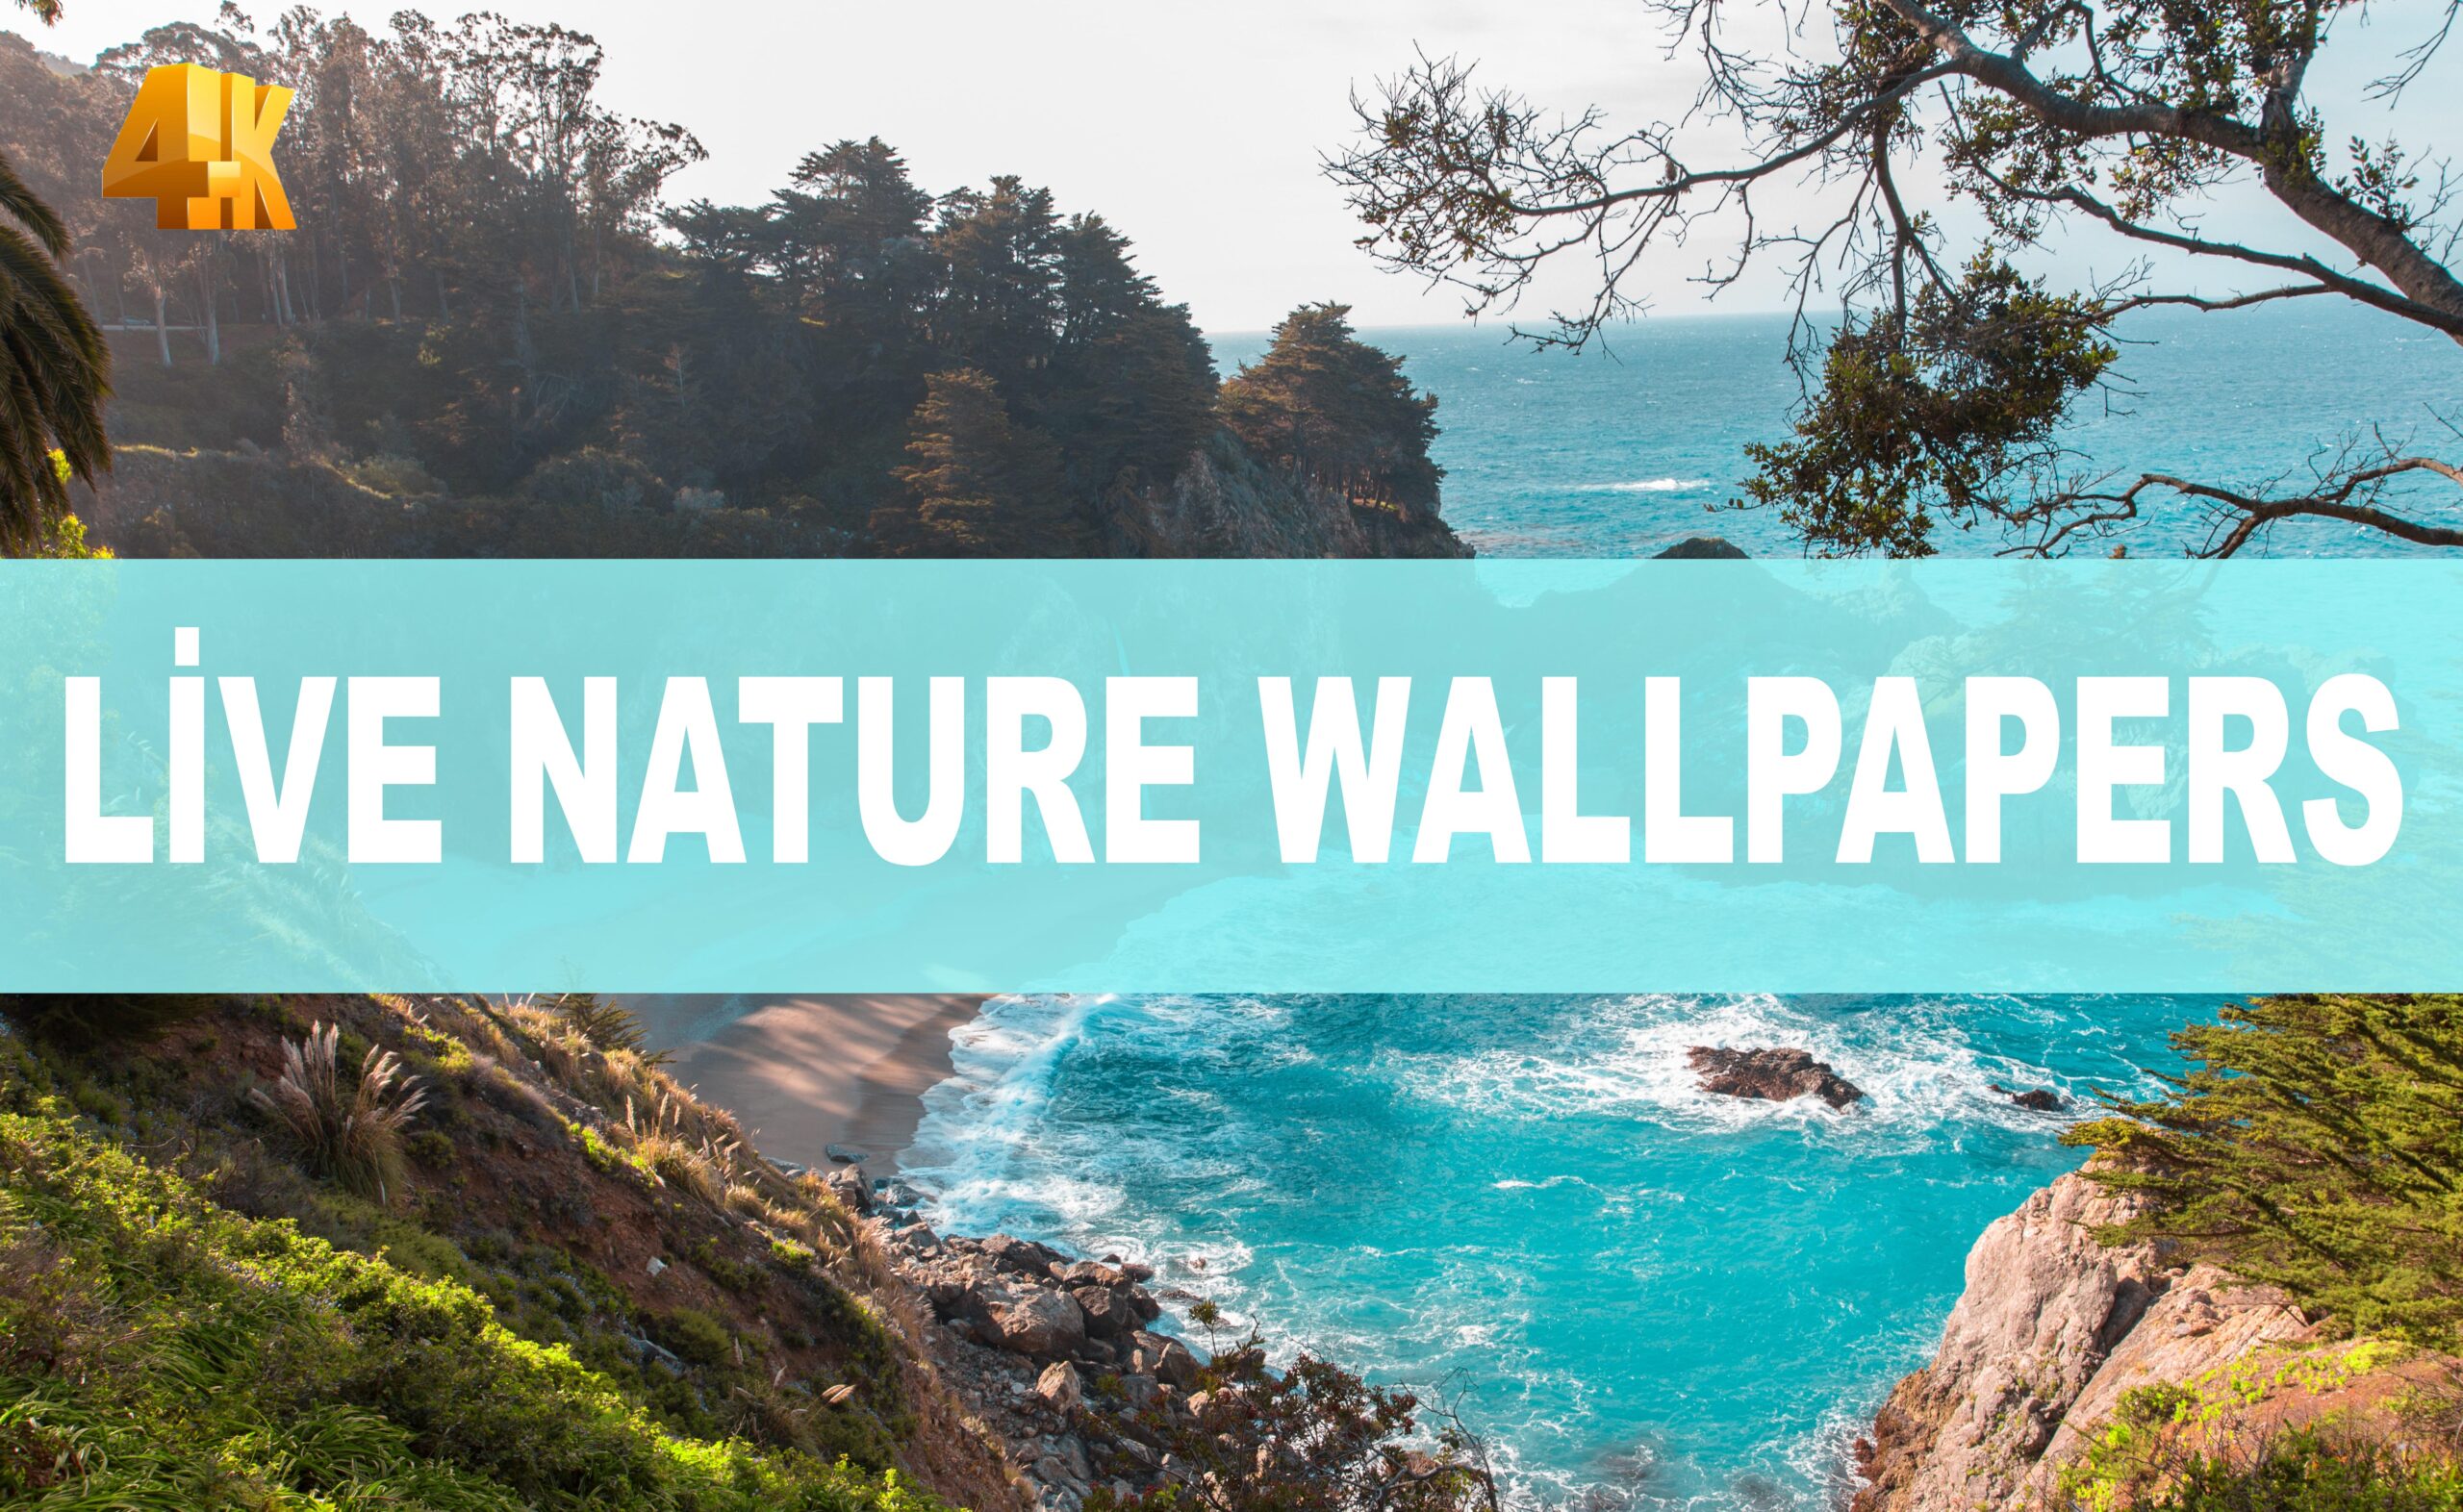 4K Live Nature Wallpapers - Live Wallpapers Prepared for Your Device